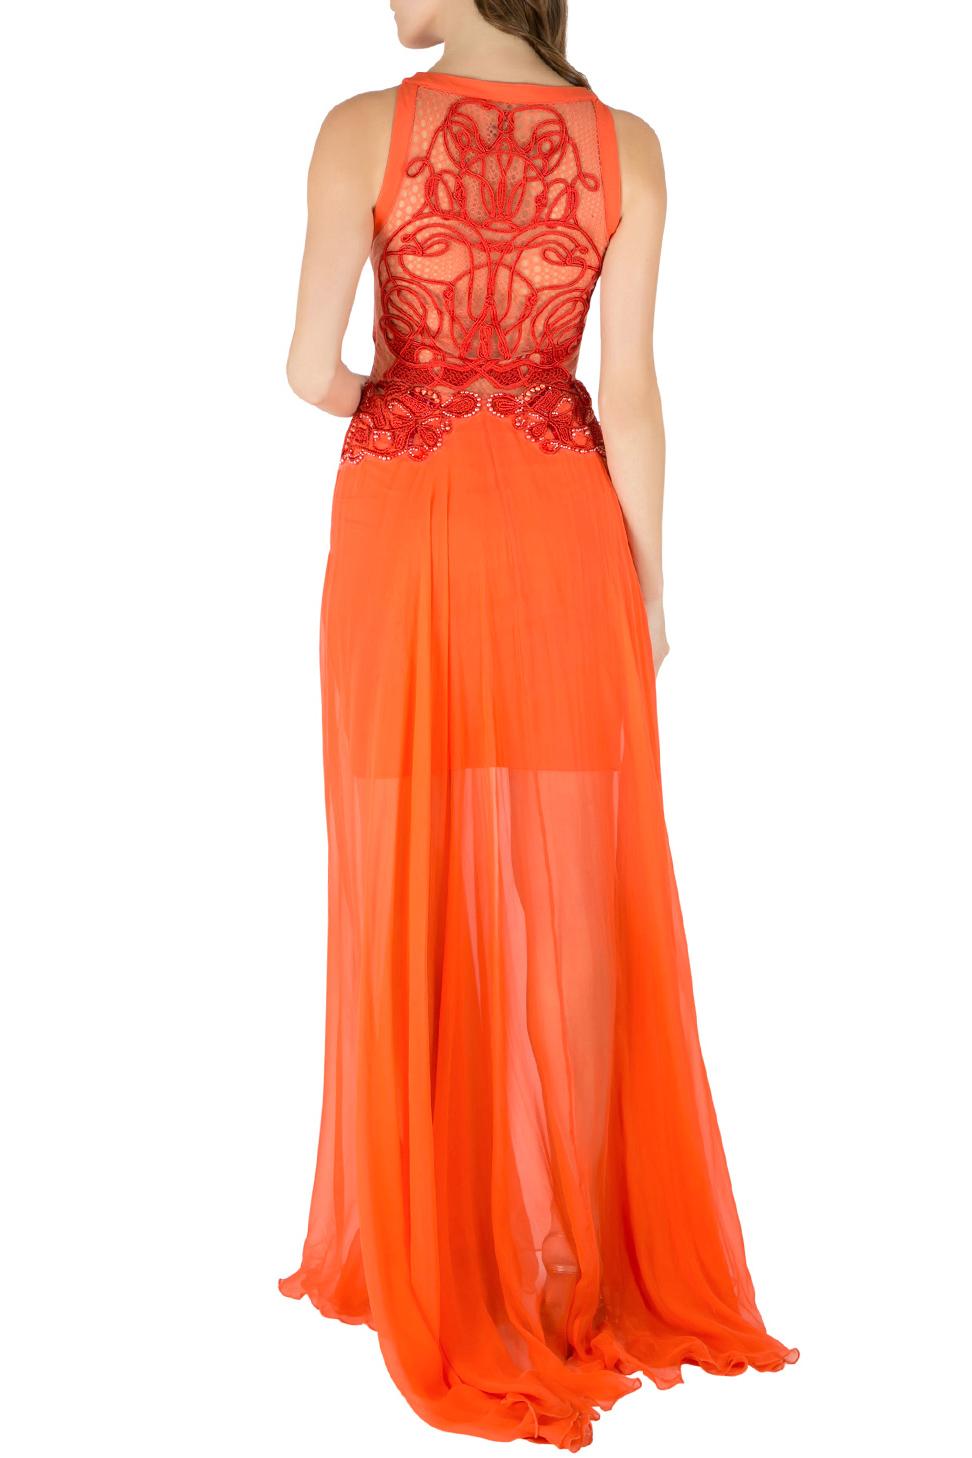 Look your best in this bright orange creation from the house of Zuhair Murad. The gown carries beautiful embellishments and embroidery on the bodice and a flowy, partially-lined skirt. It can be made more alluring by adding the right kind of